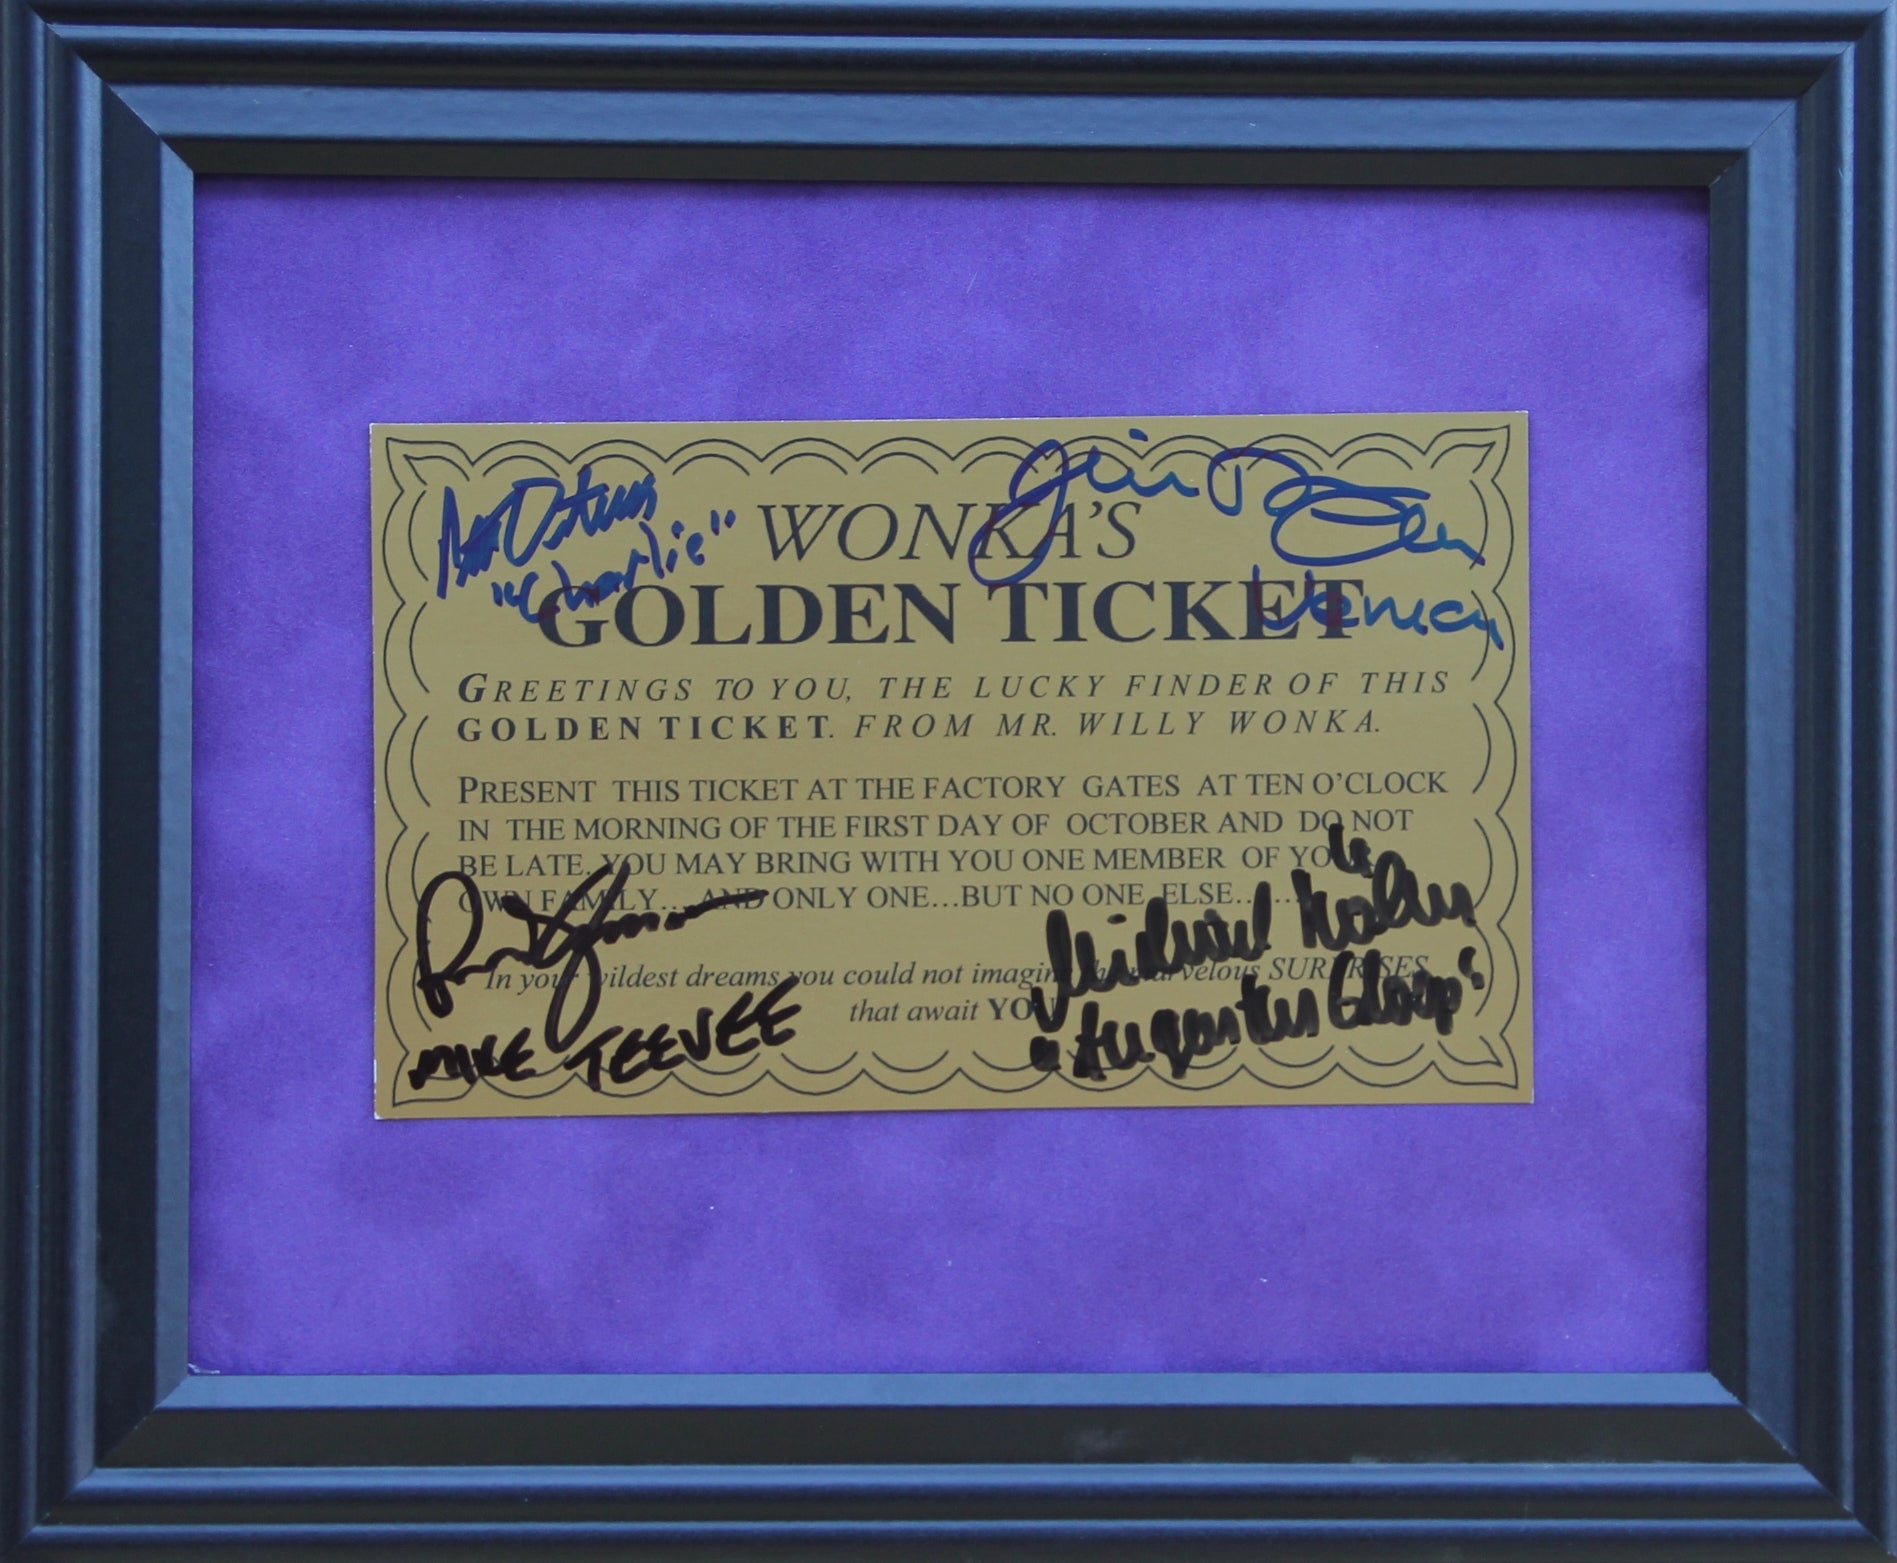 FRAMED WONKA'S GOLDEN TICKET - 10 x 12 AUTOGRAPHED BY FOUR – Wonka Shop